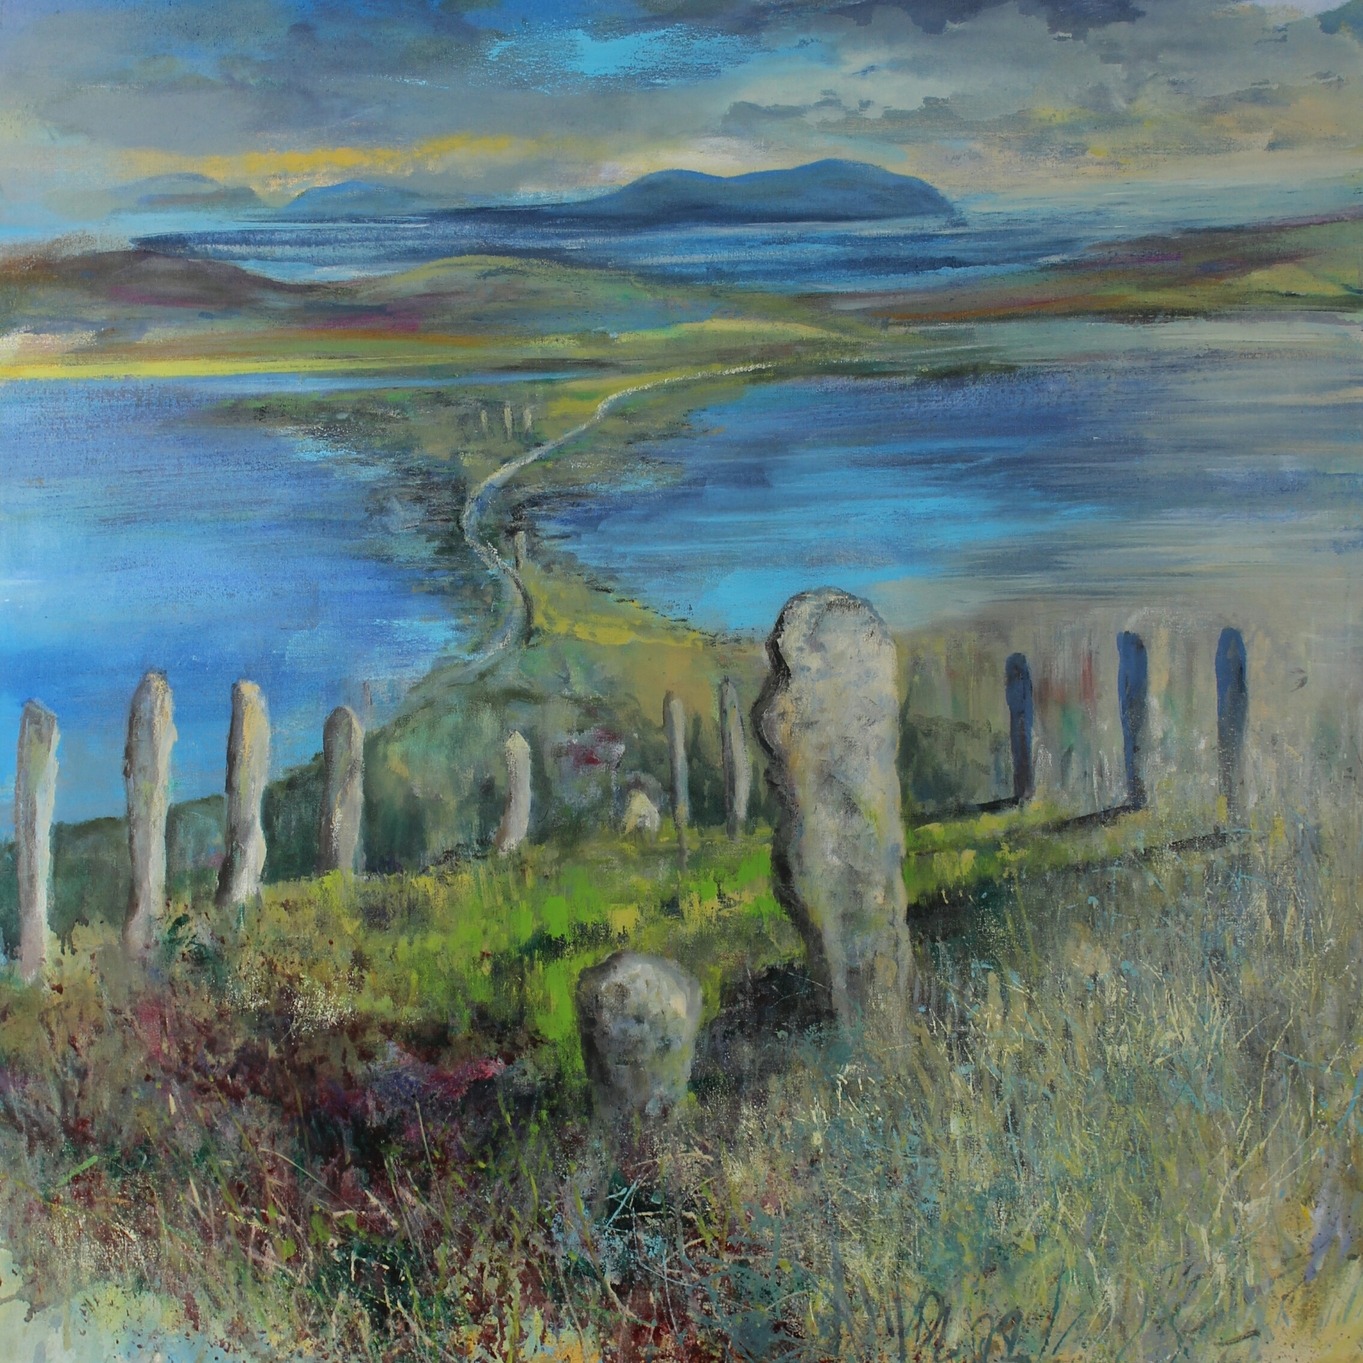 Ring of Brodgar, Orkney. Oil on canvas 100x100cm.